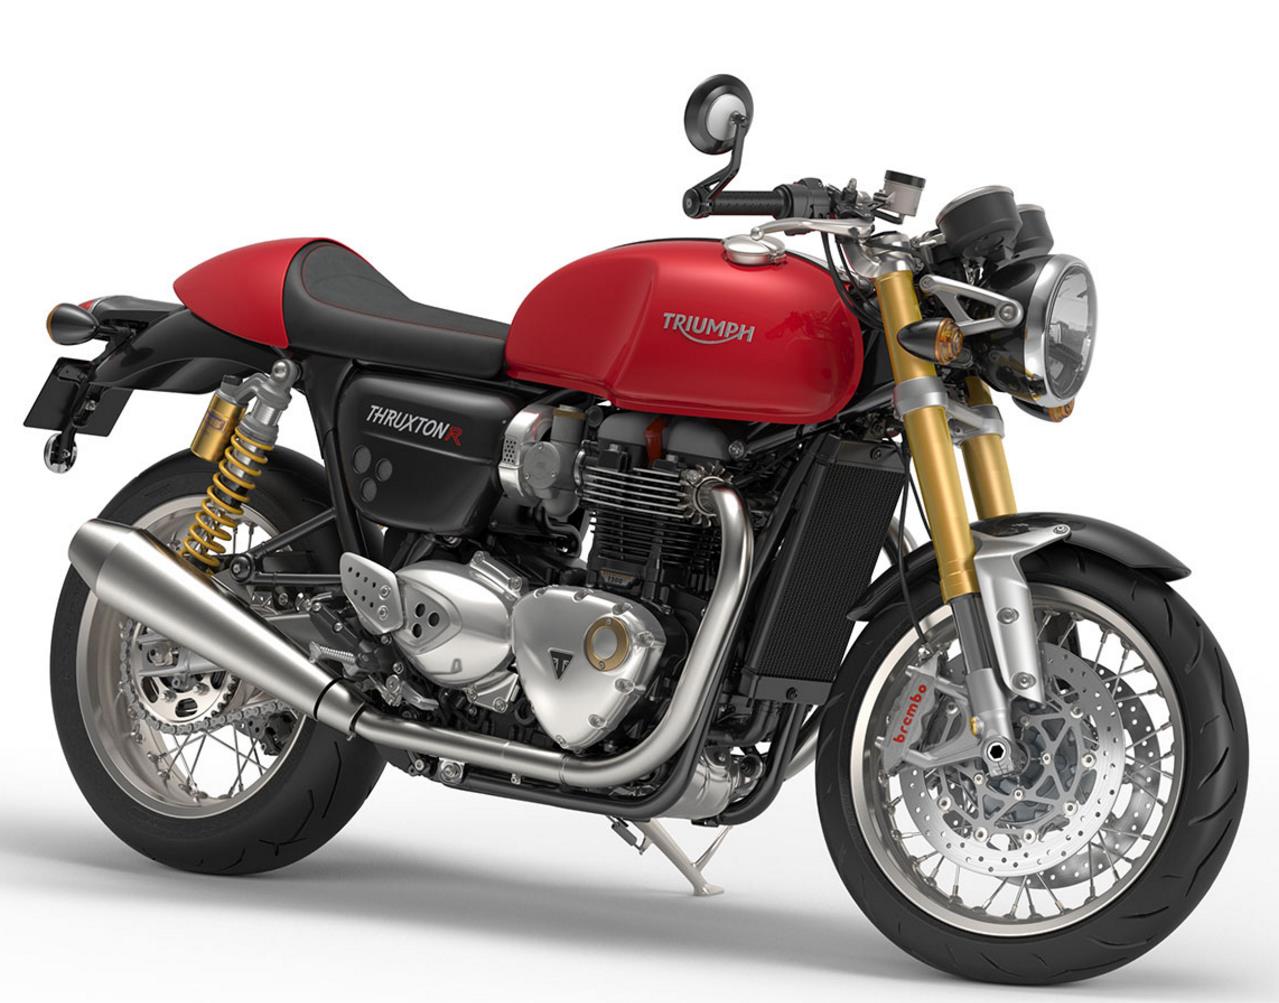 Triumph Thruxton R launched in India at INR 10.90 lakh